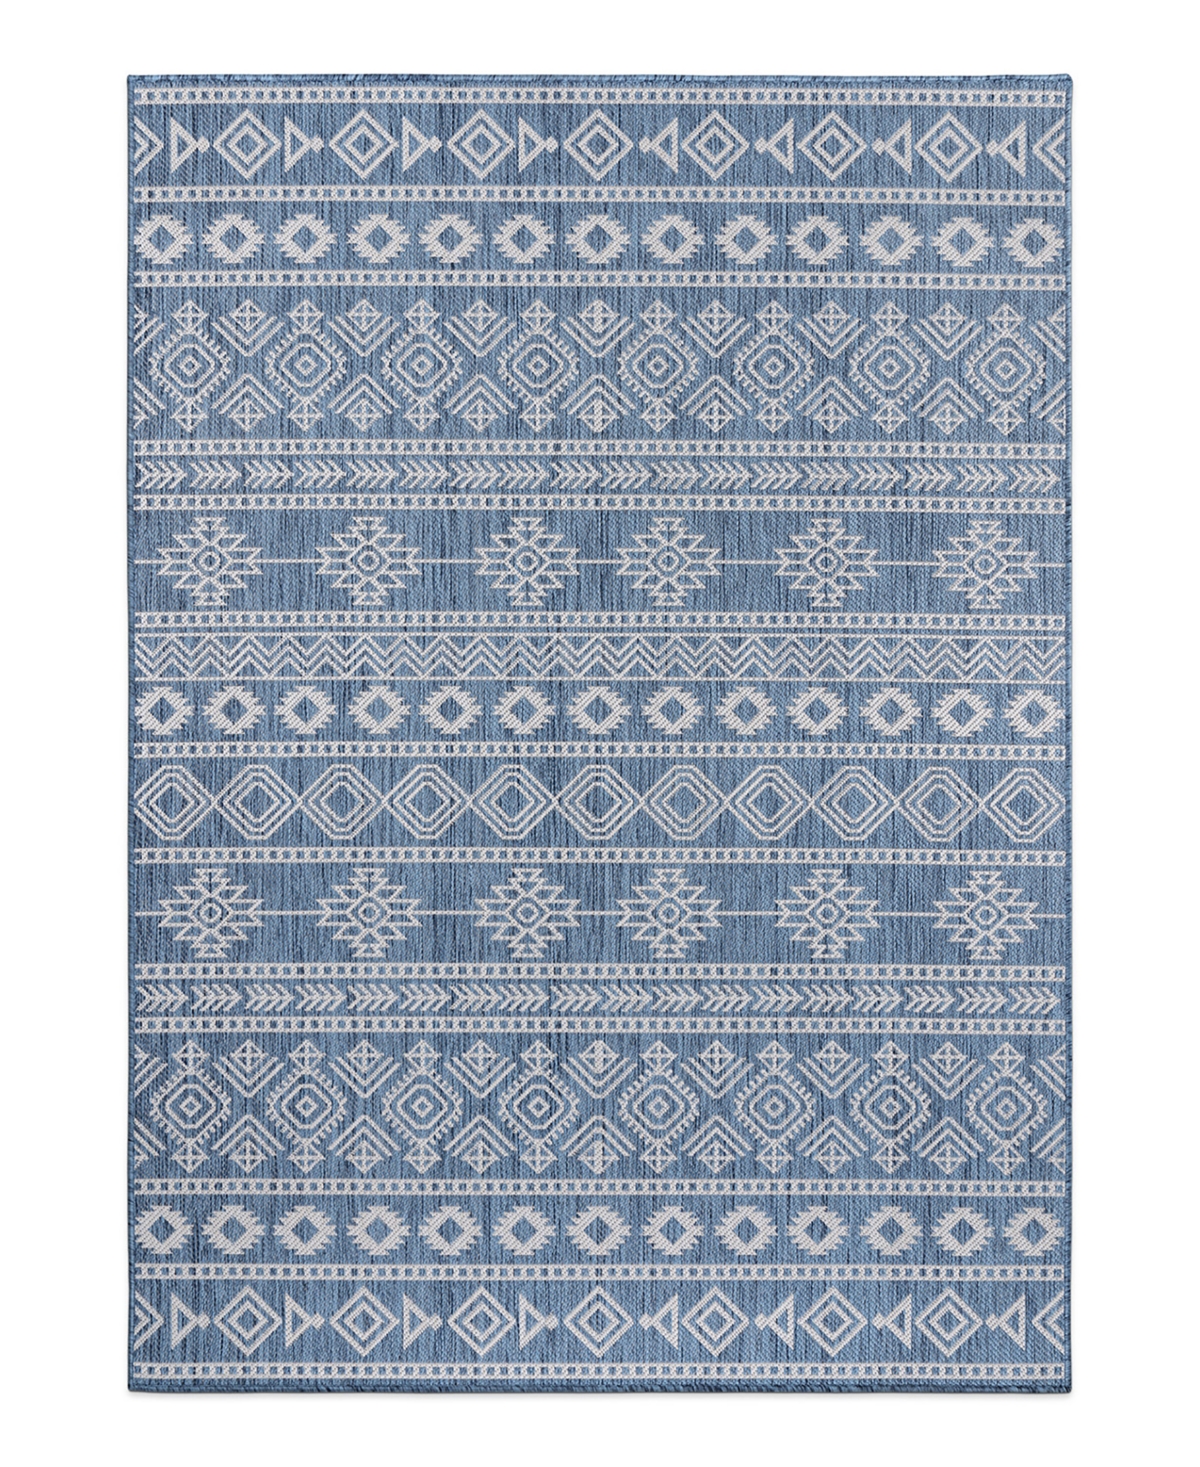 Main Street Rugs Bays Outdoor 123 7'10" X 10' Area Rug In Blue